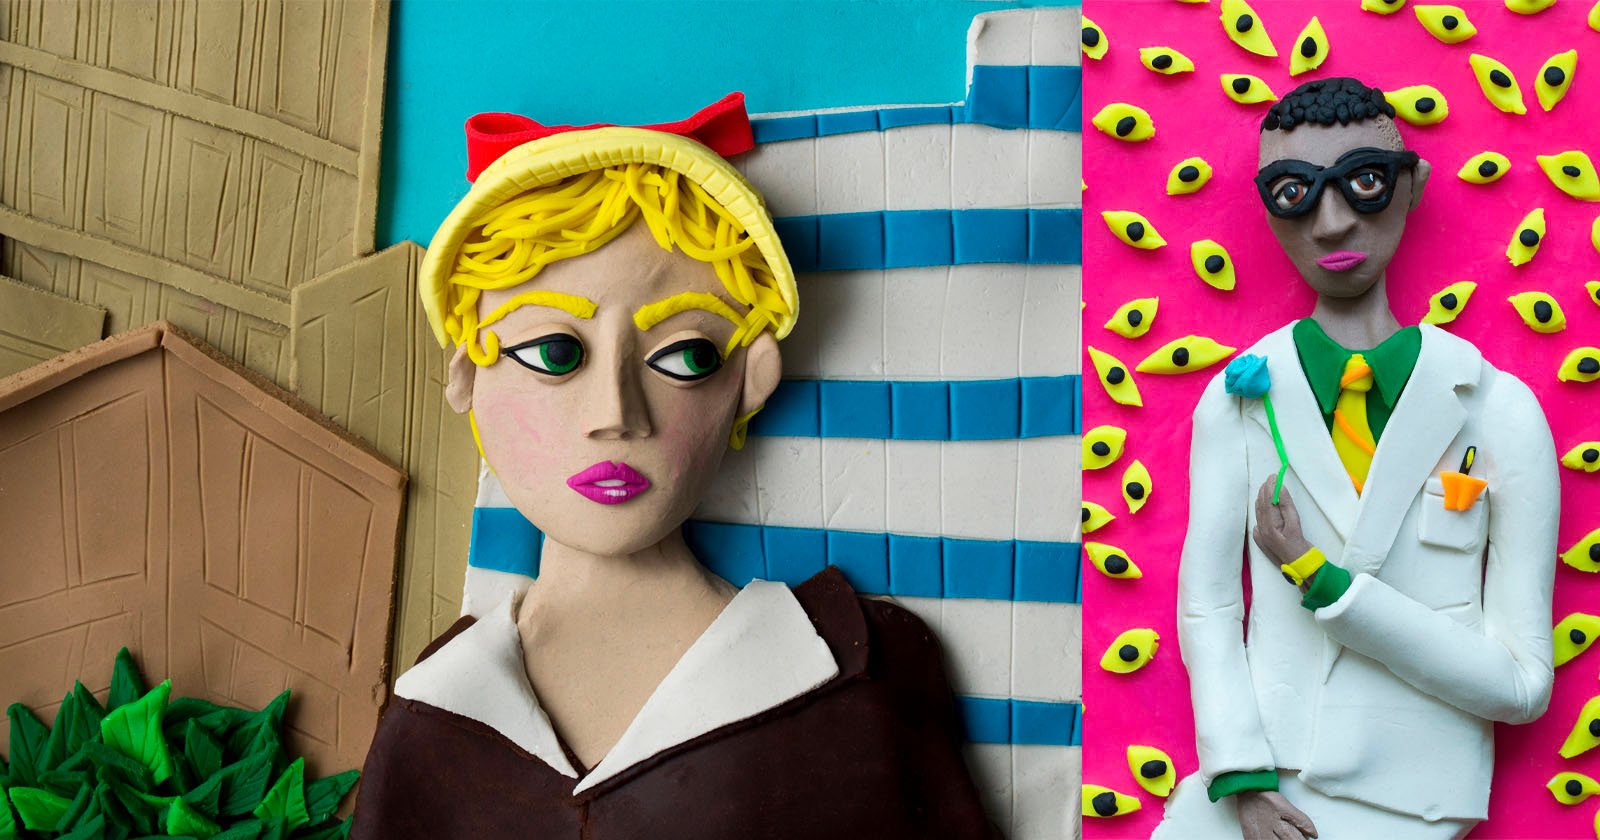 Artist Spotlights Photographers by Recreating Their Work in Play-Doh